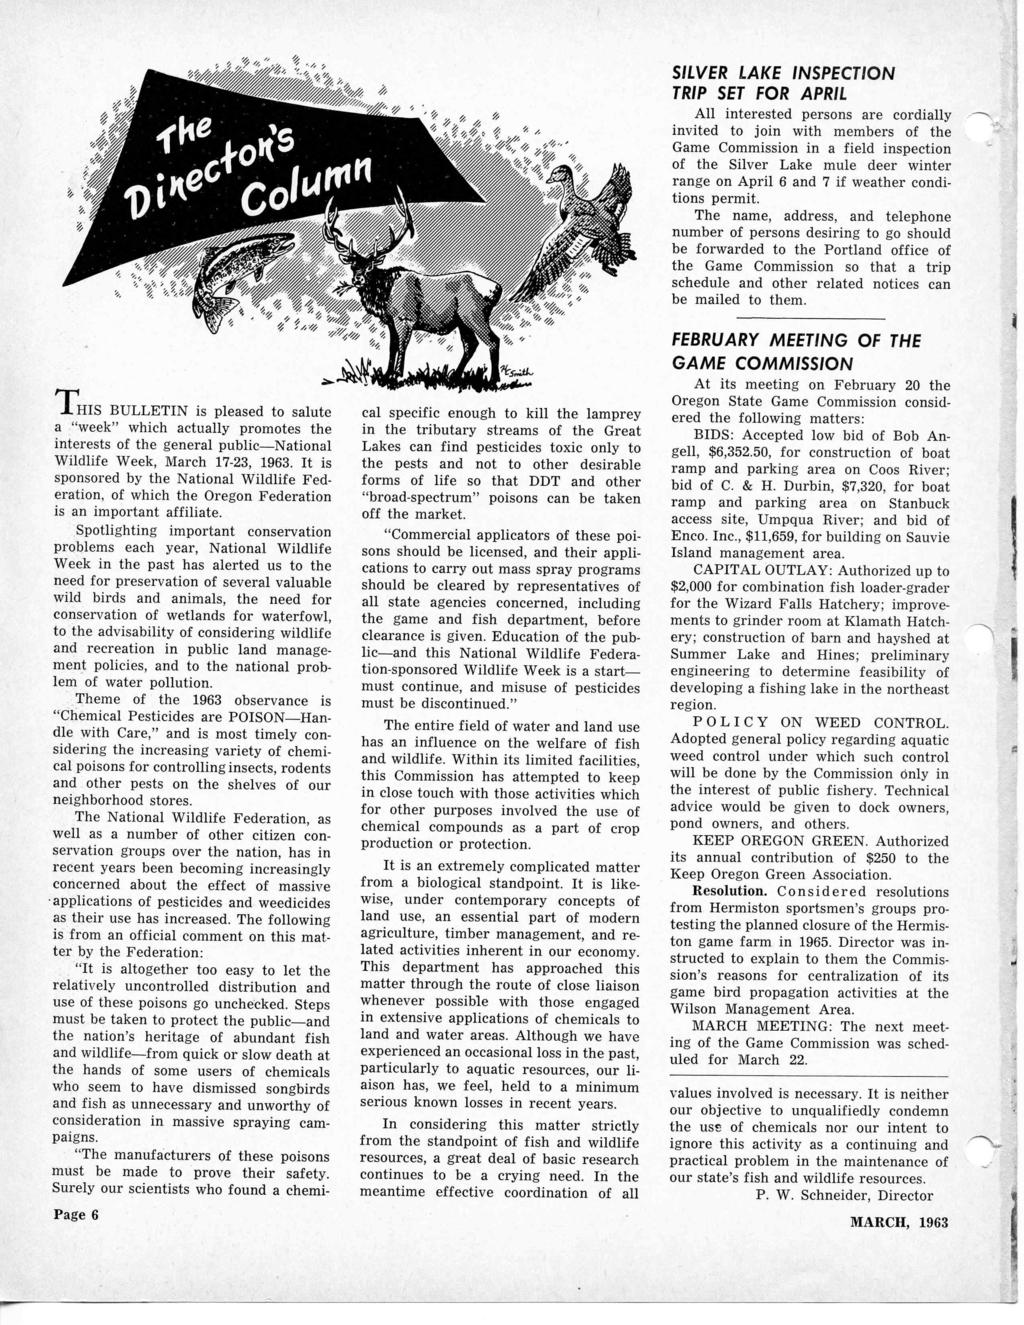 4%.% (.h. THIS BULLETIN is pleased to salute a "week" which actually promotes the interests of the general publicnational Wildlife Week, March 17-23, 1963.